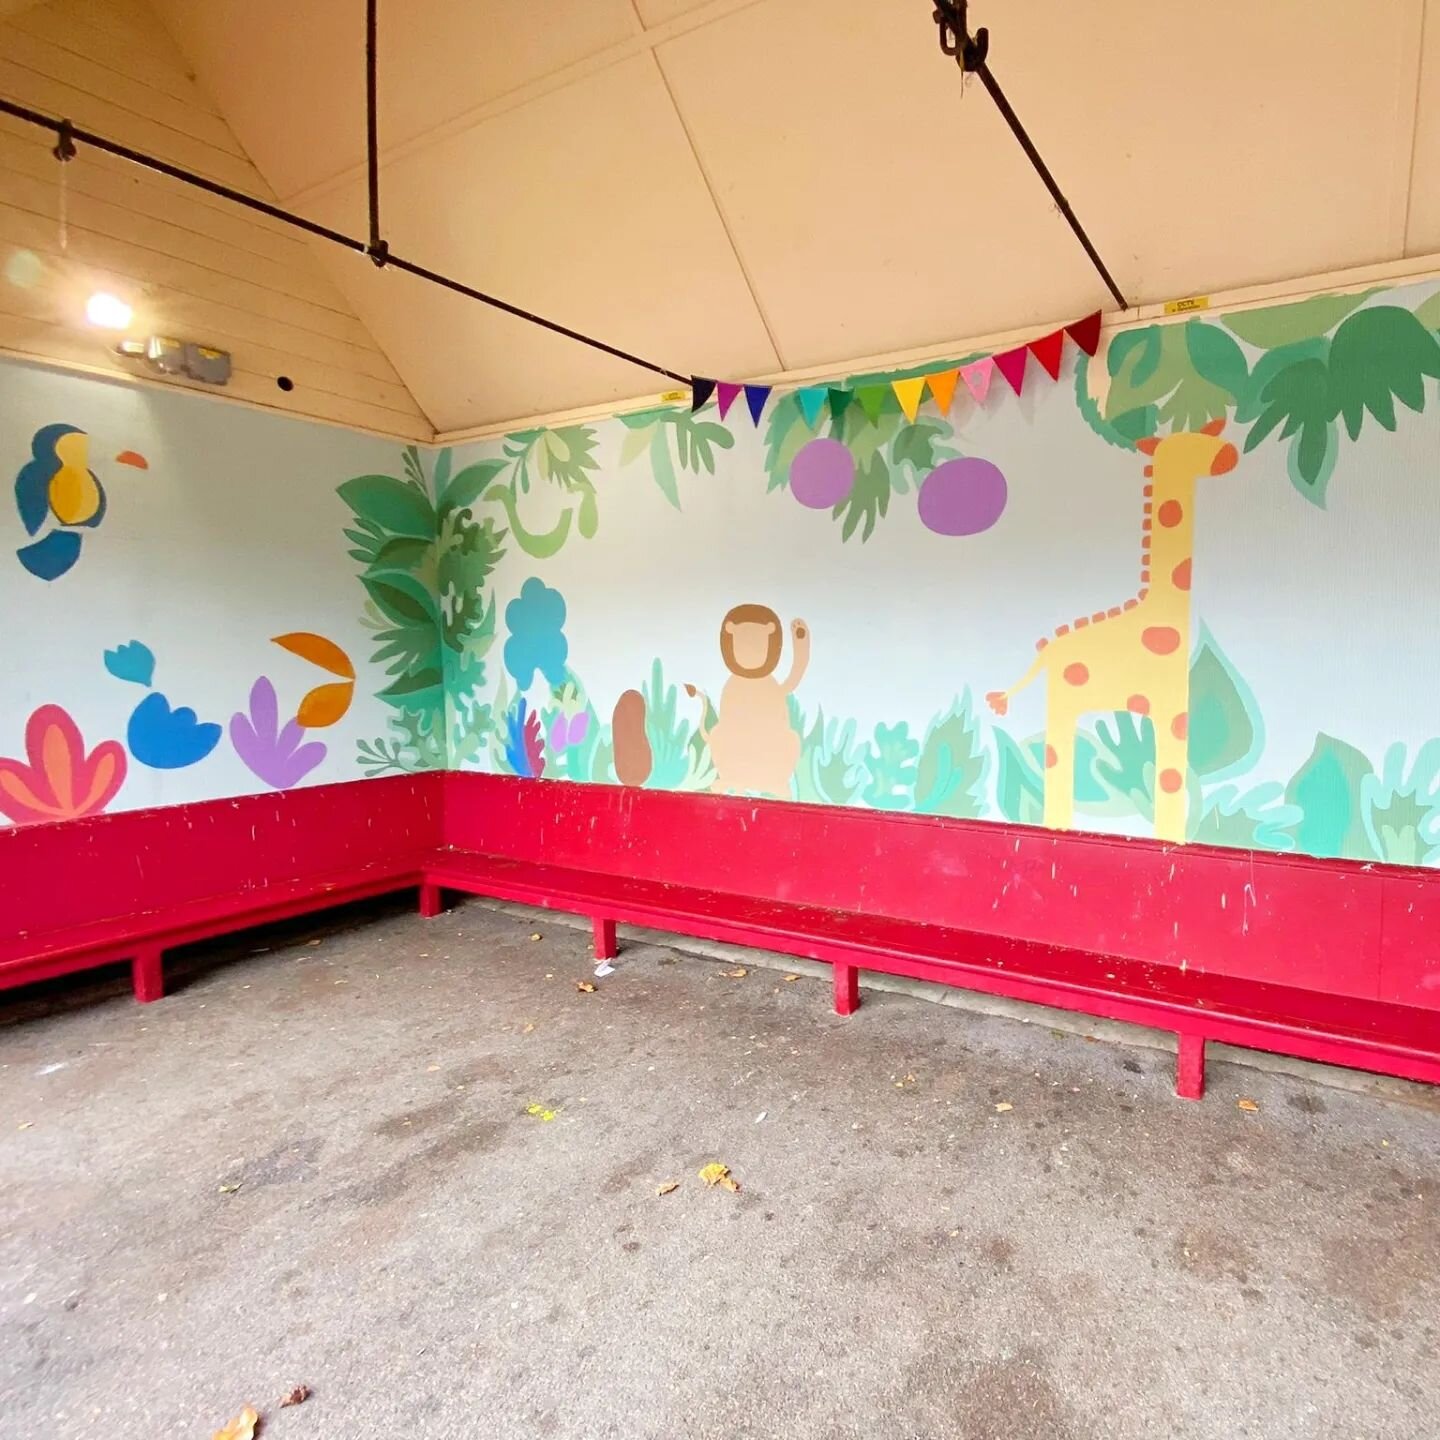 how roar-some is this?!?

Two days in and I can't believe how quickly this space is coming to life!!

The jungle characters created by RampArtist @paige_legeyt07 haven't lost any of their playful charm in their upscale 🐘🐍🦁

It's been wonderful cha